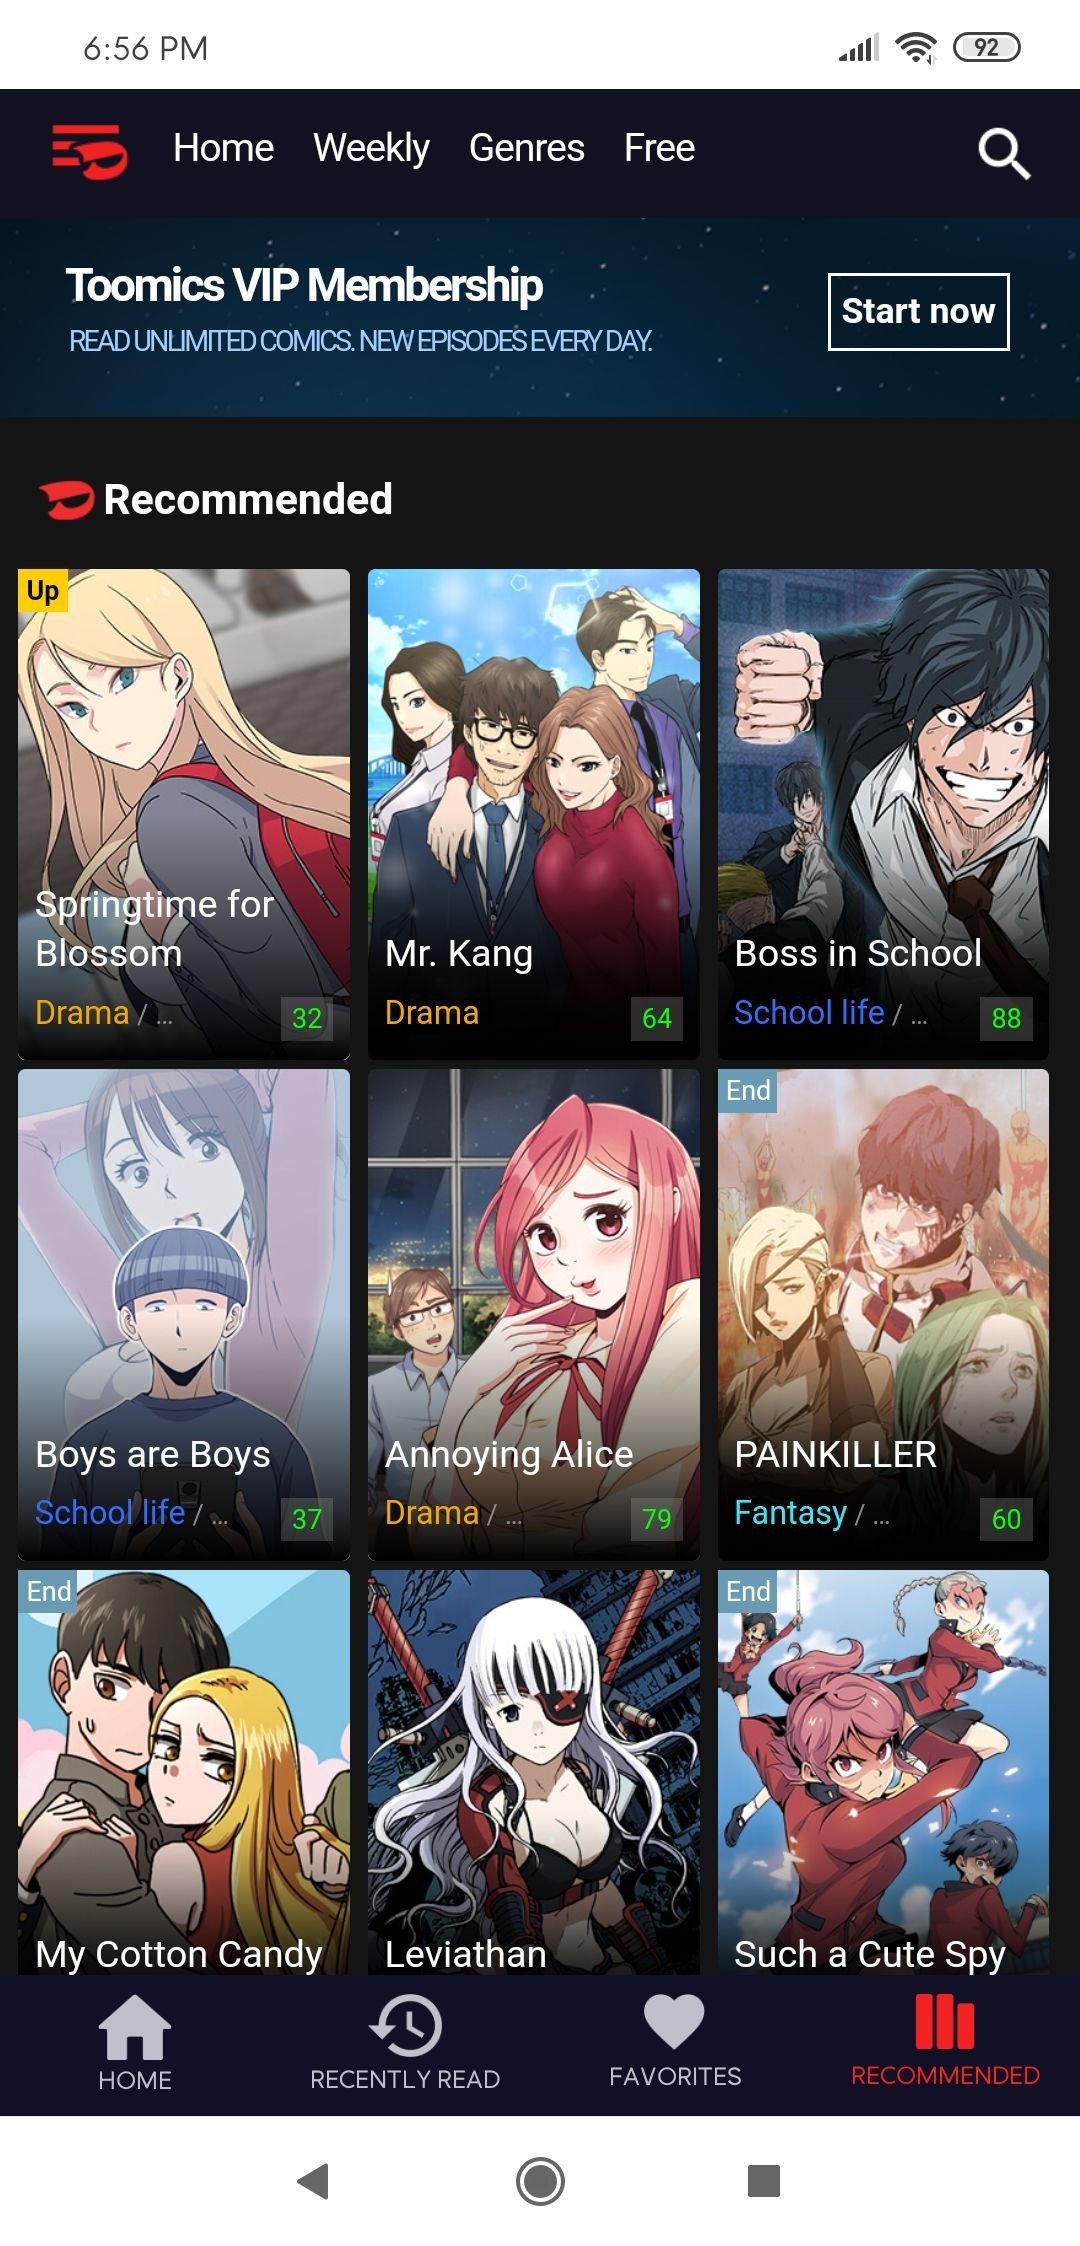 redbox tv app for android free download